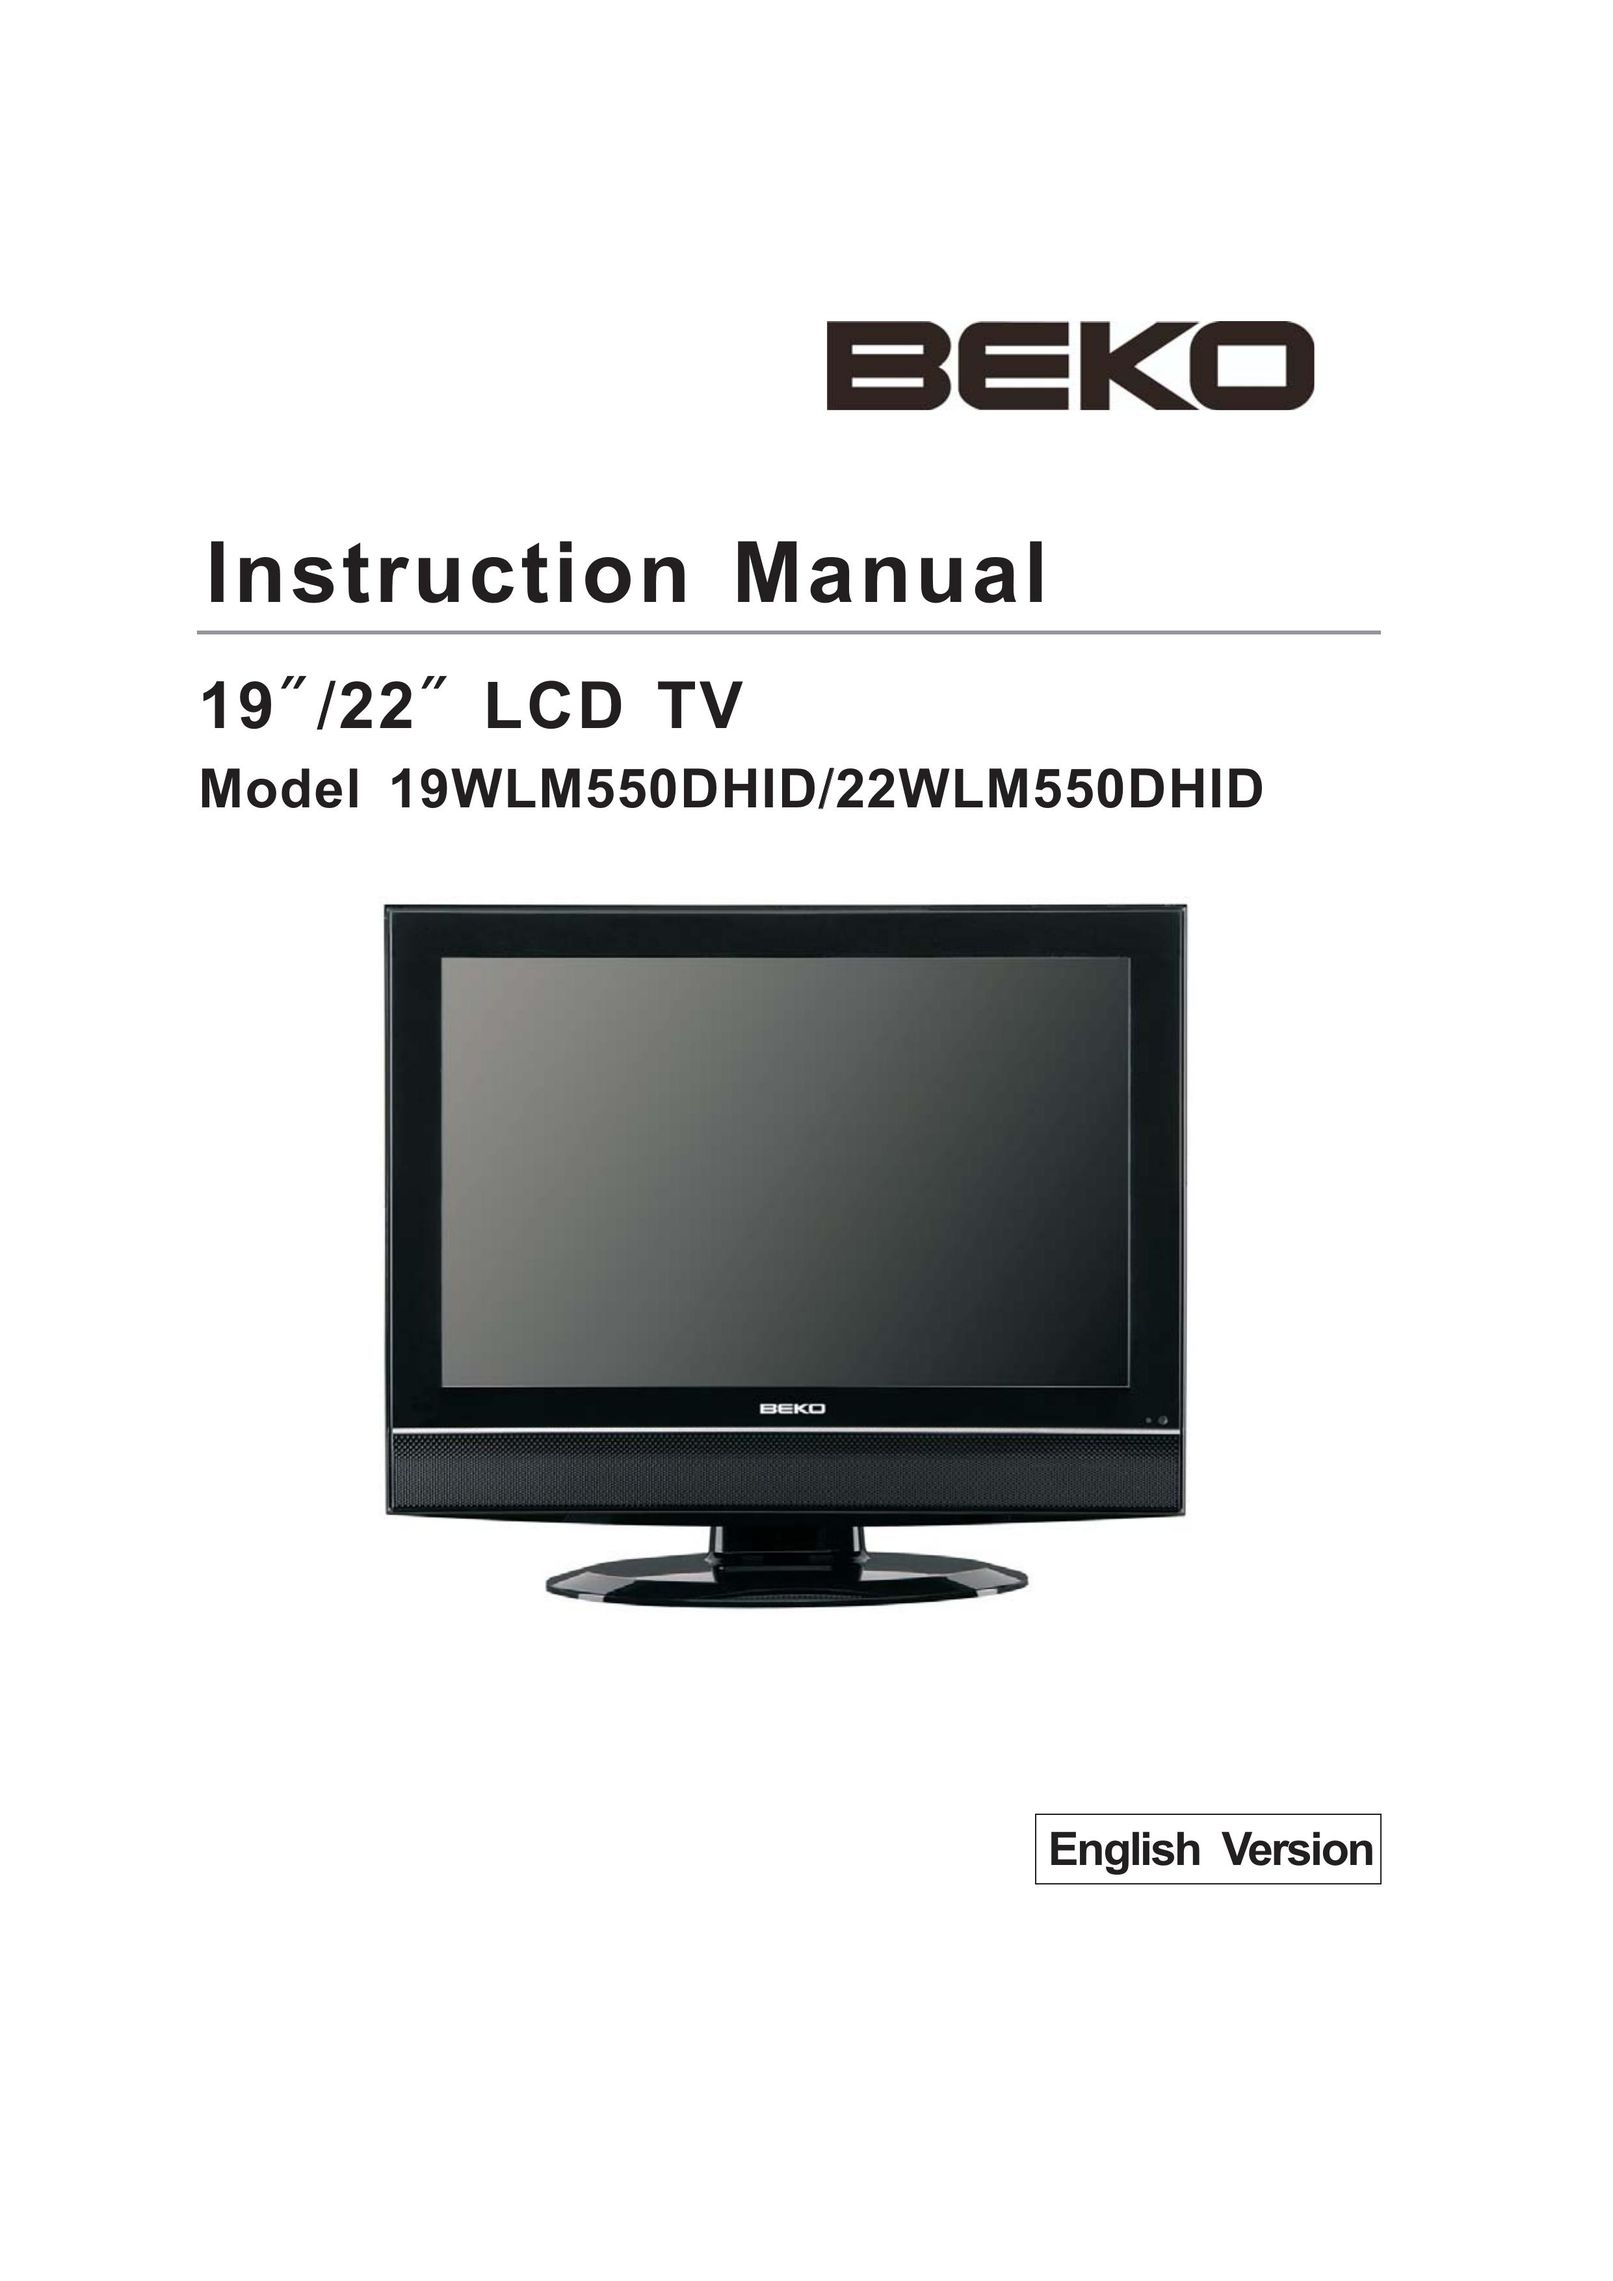 Beko 22WLM550DHID Flat Panel Television User Manual